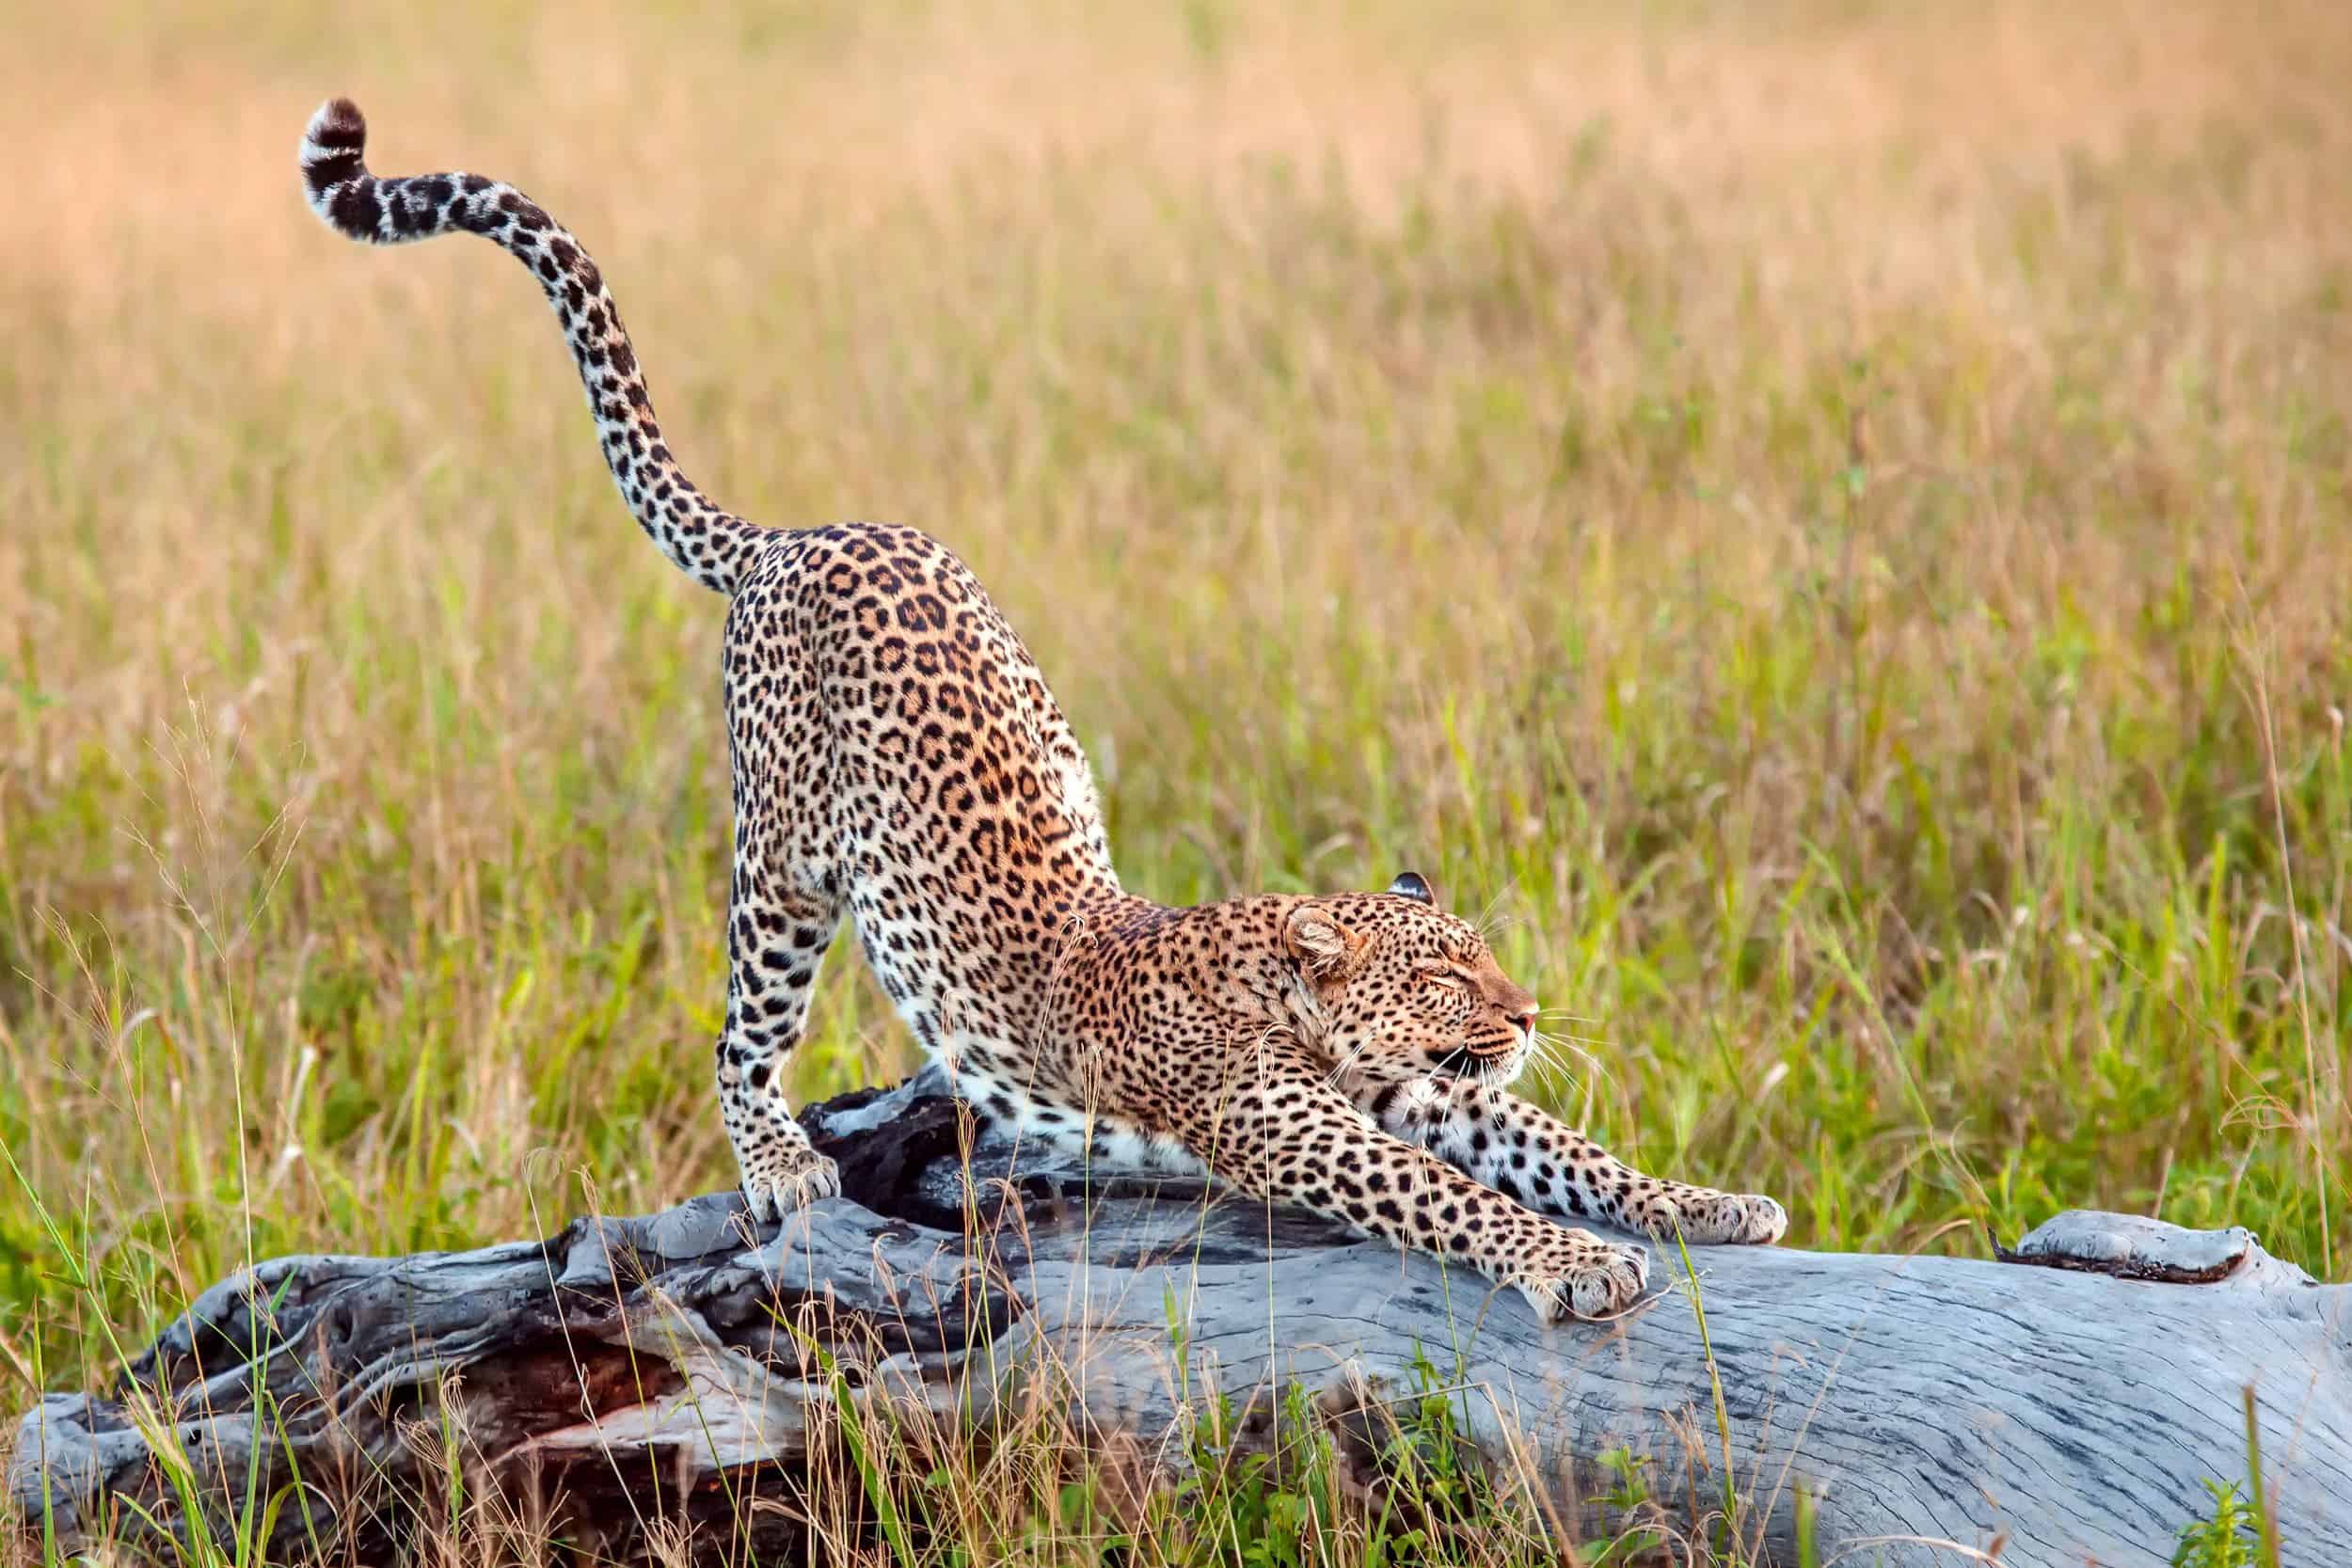 cheetah-stretching-on-a-piece-of-wood.